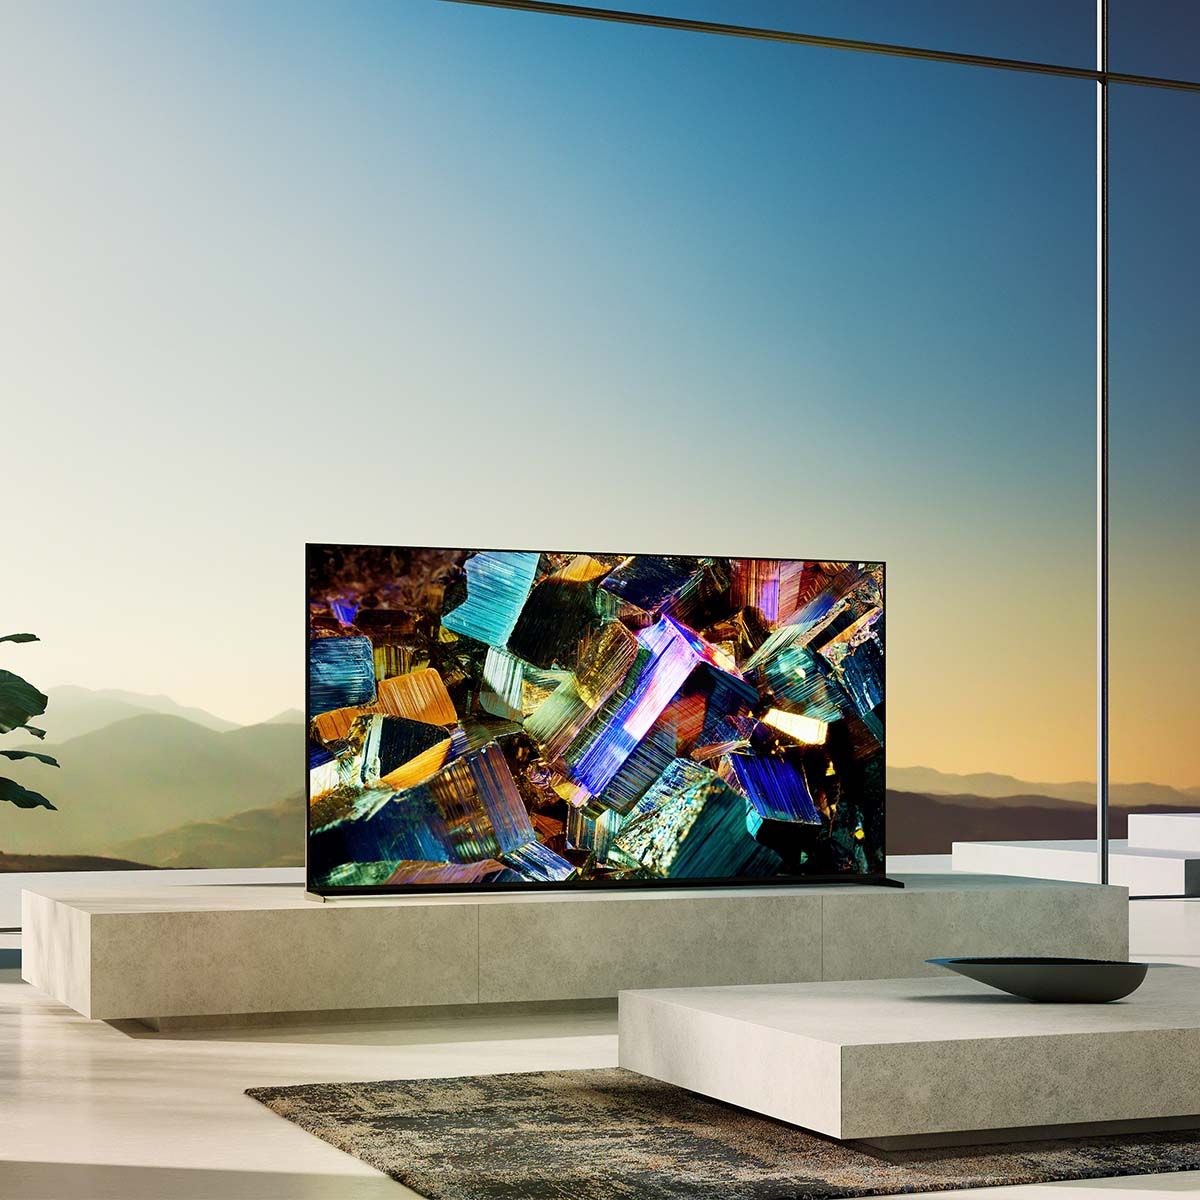 Sony BRAVIA XR Z9K 8K LED HDR Television, on a media stand in front of a large window with a sunset view